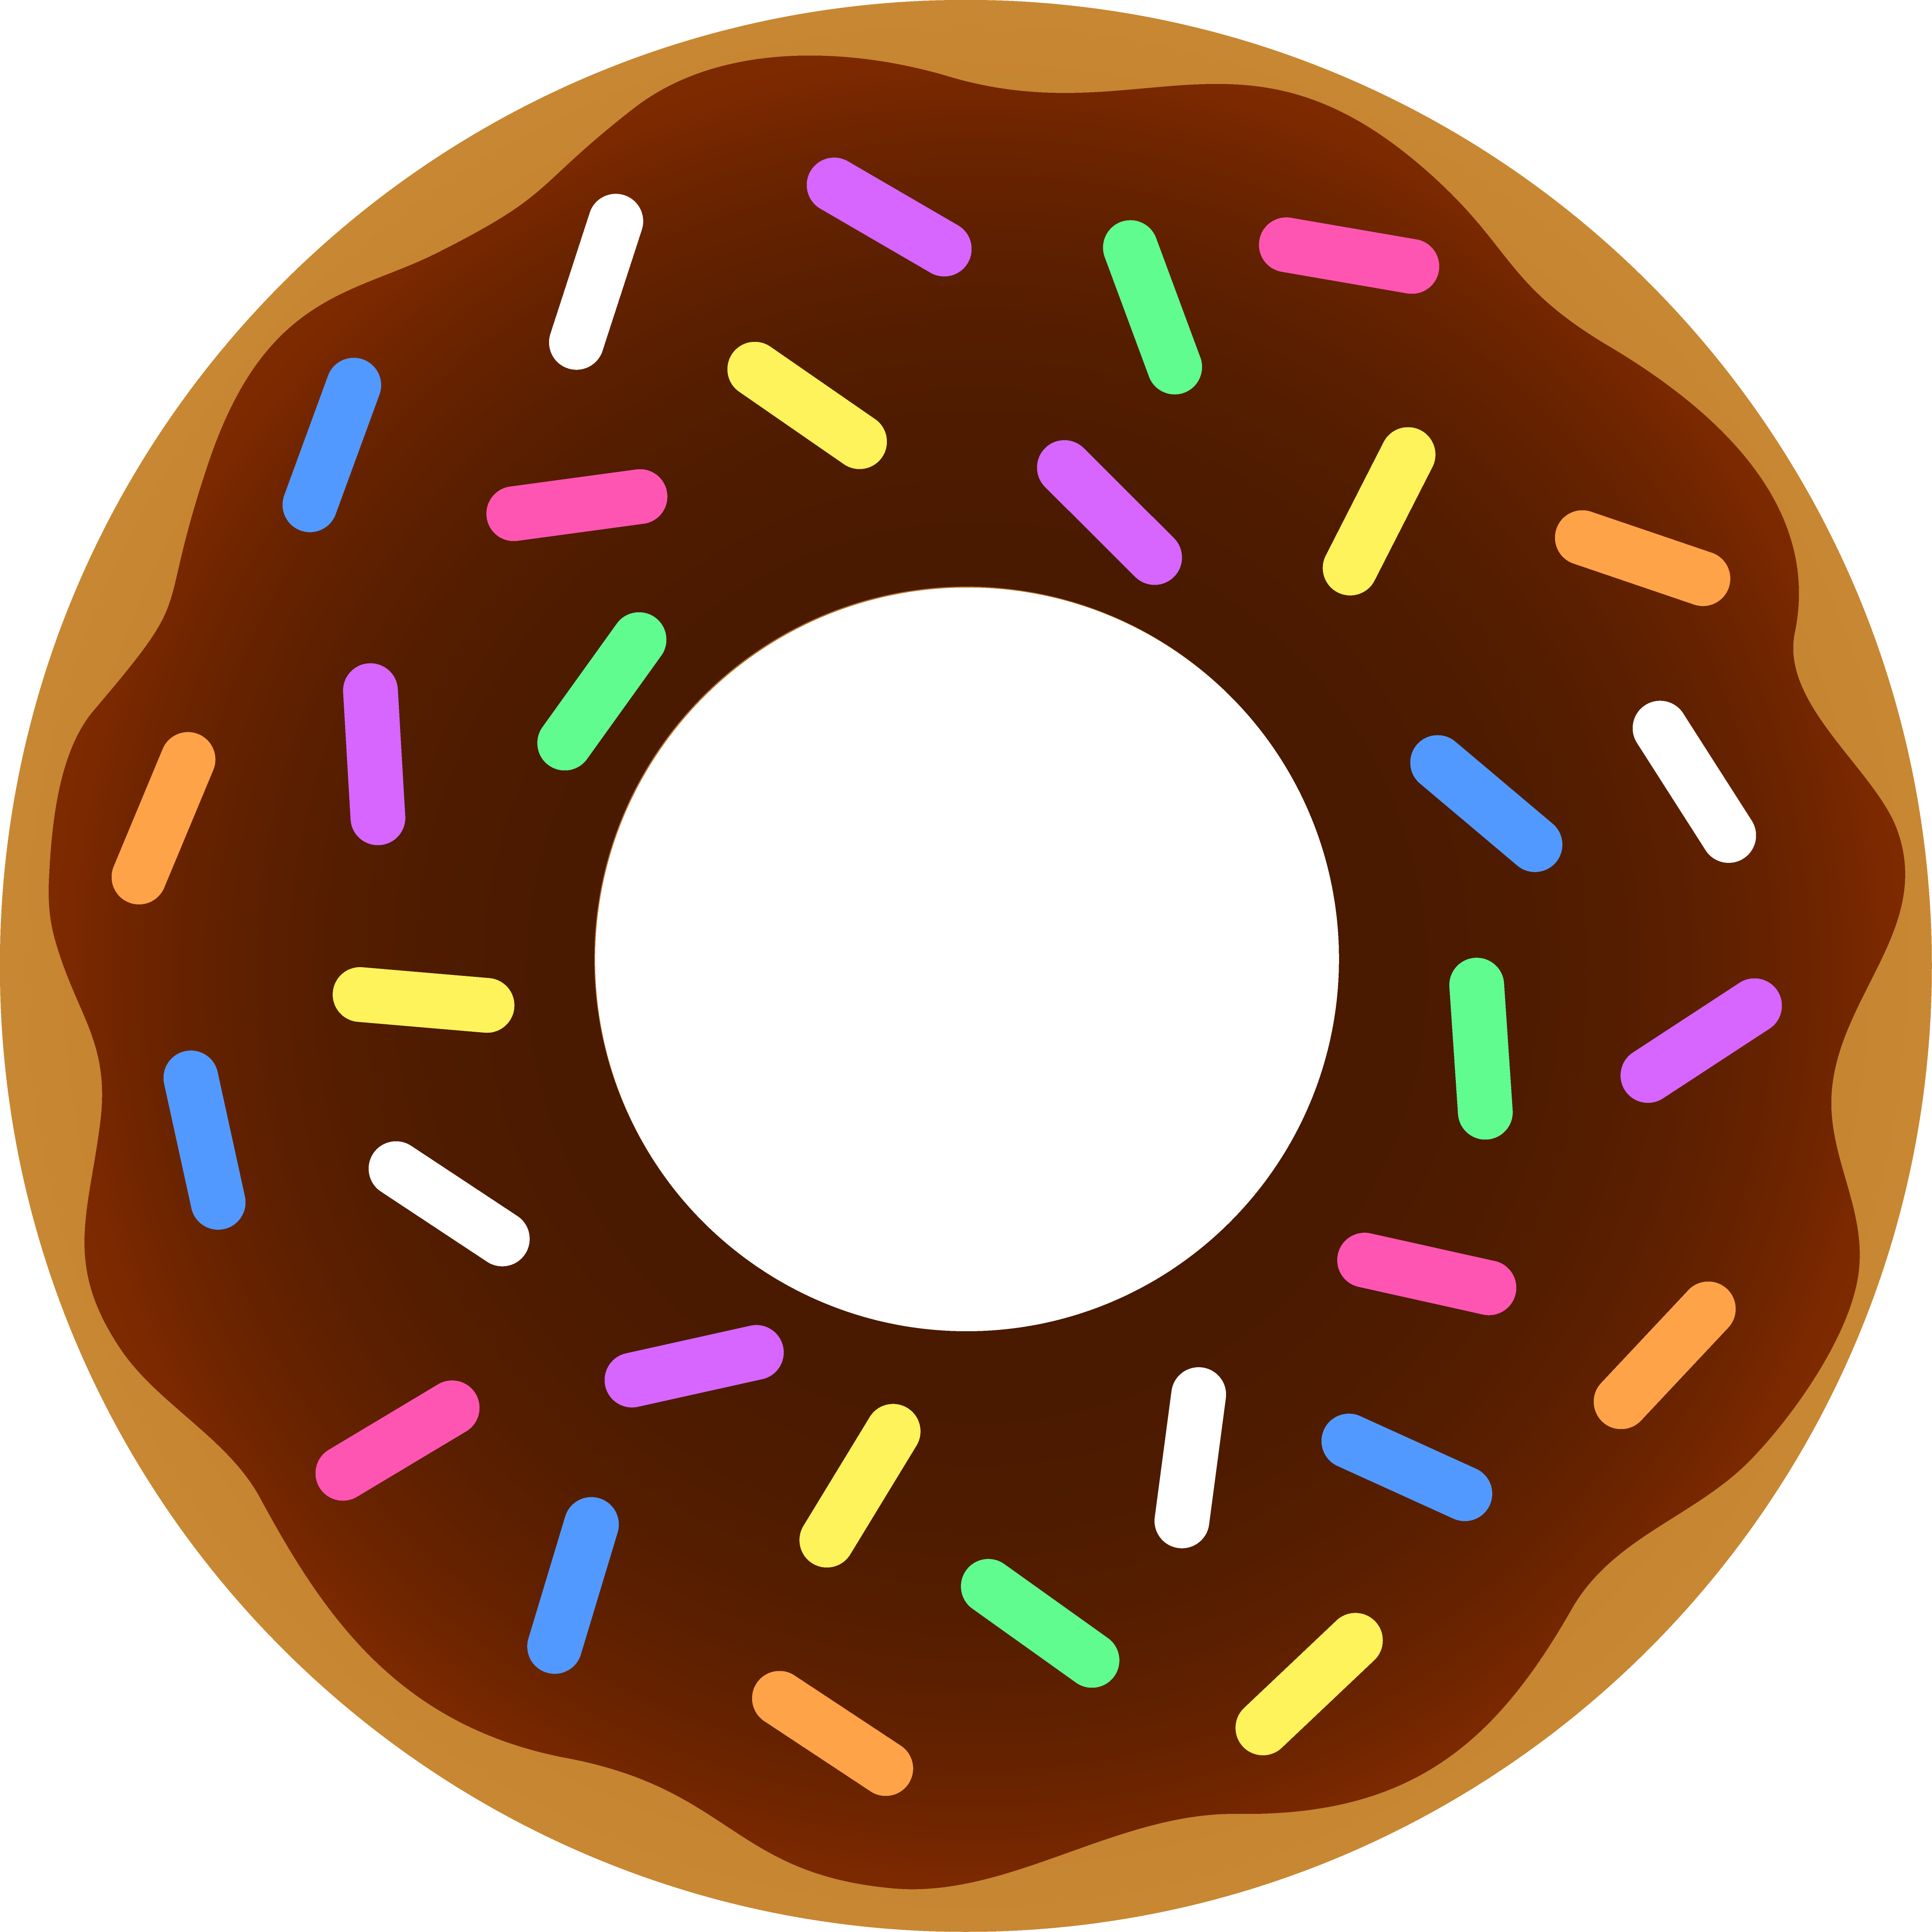 Chocolate Donut With Sprinkles - Free Clip Art